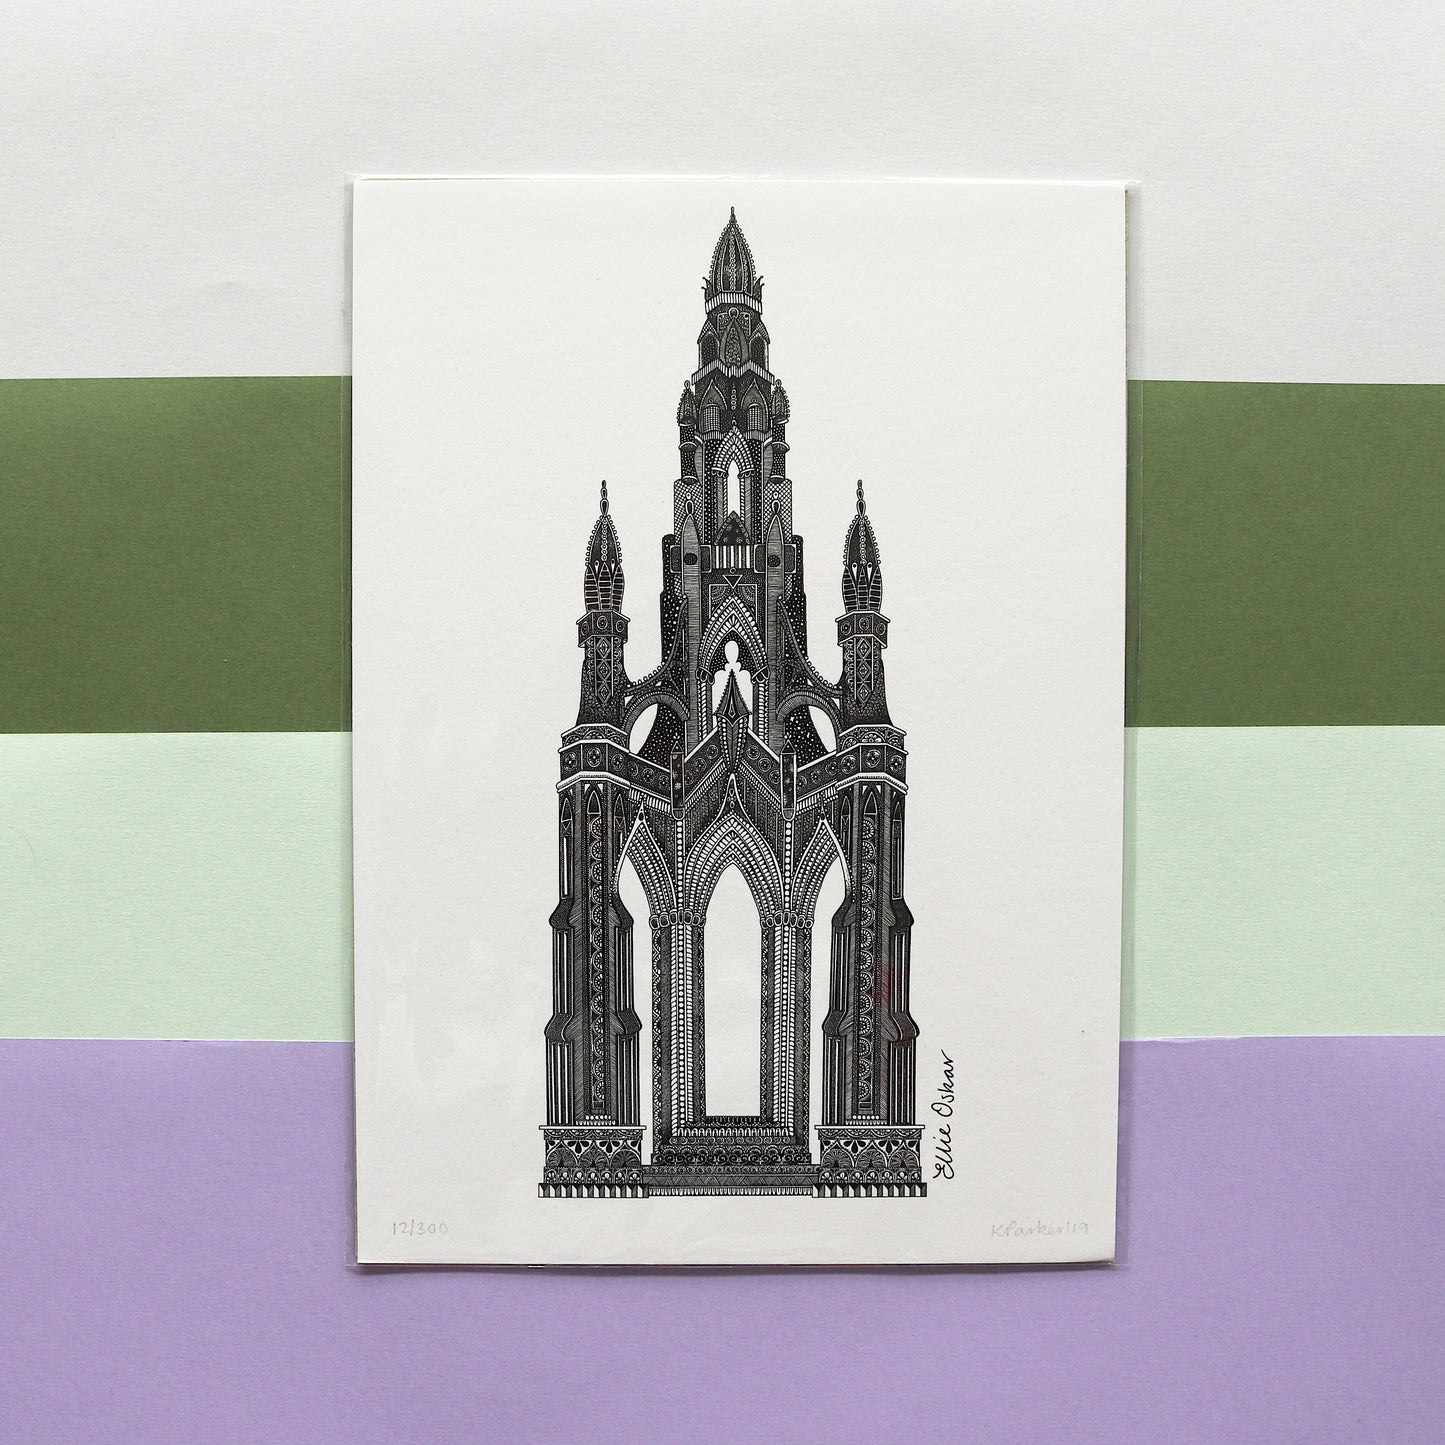 SALE - A3 Scott Monument **Old Branding** - 3 available